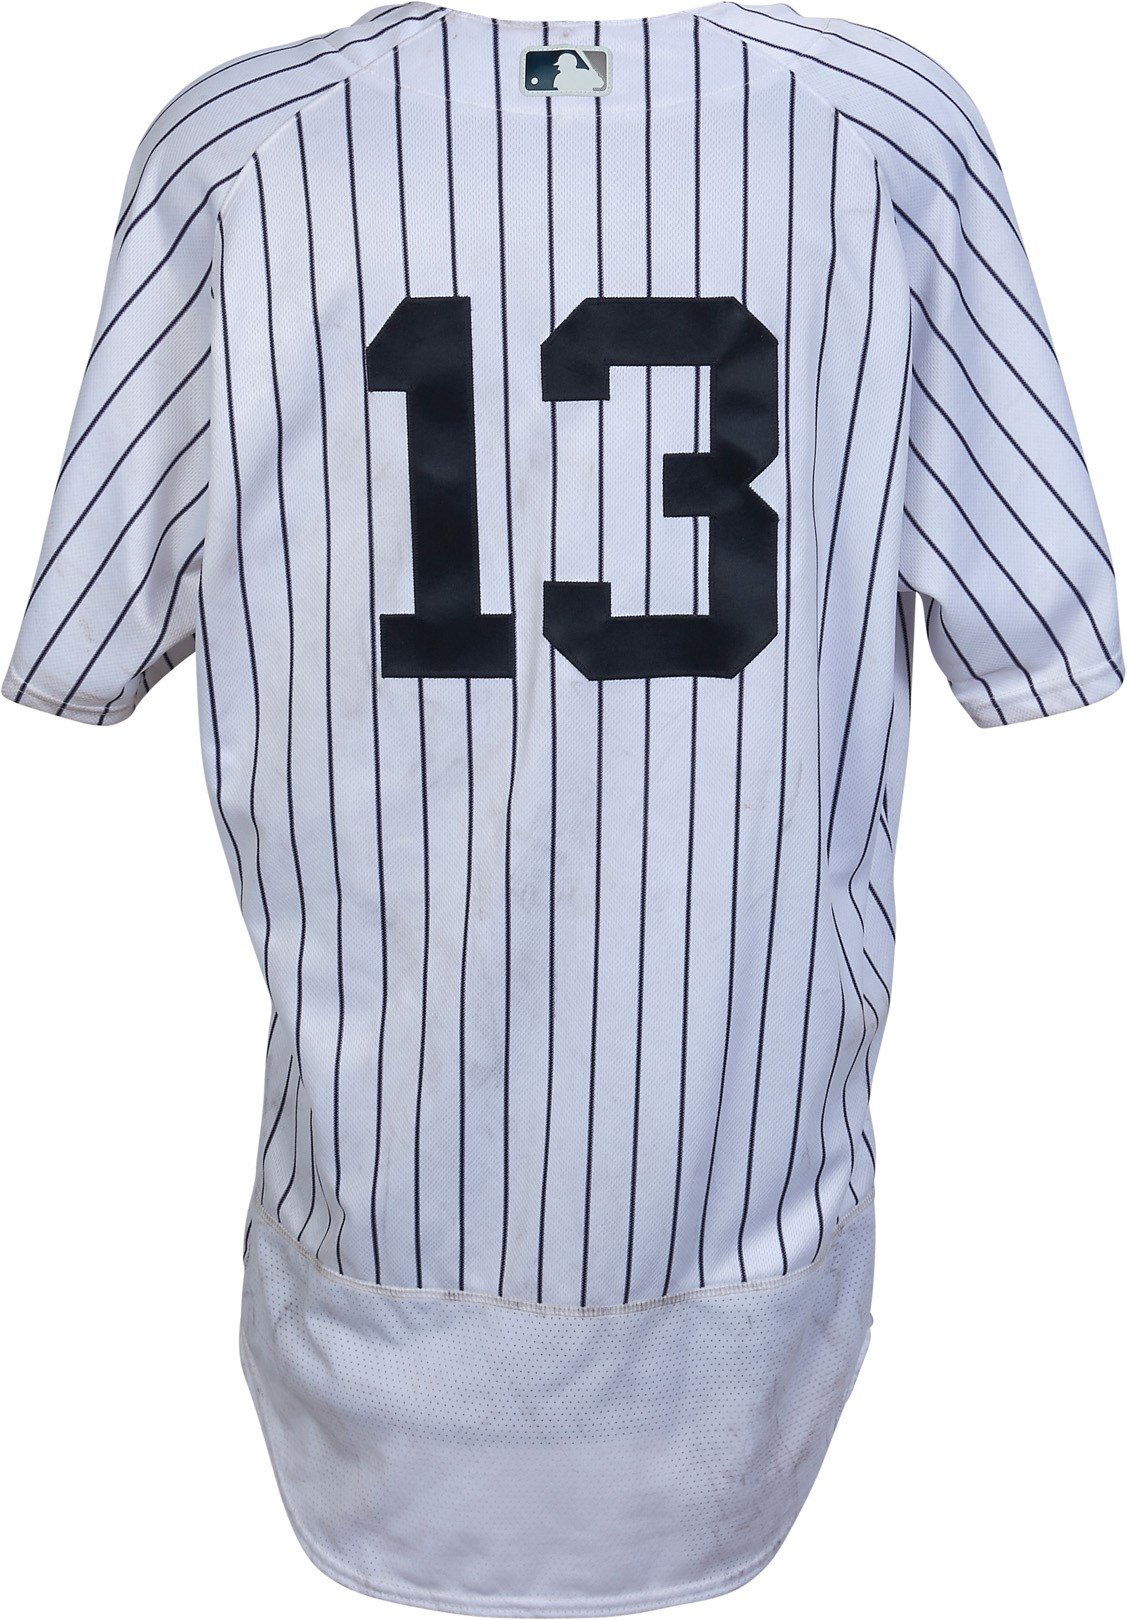 - 2016 Opening Day Alex Rodriguez Game Worn Yankees Jersey - Final Season (Steiner LOA & Photo-Matched)